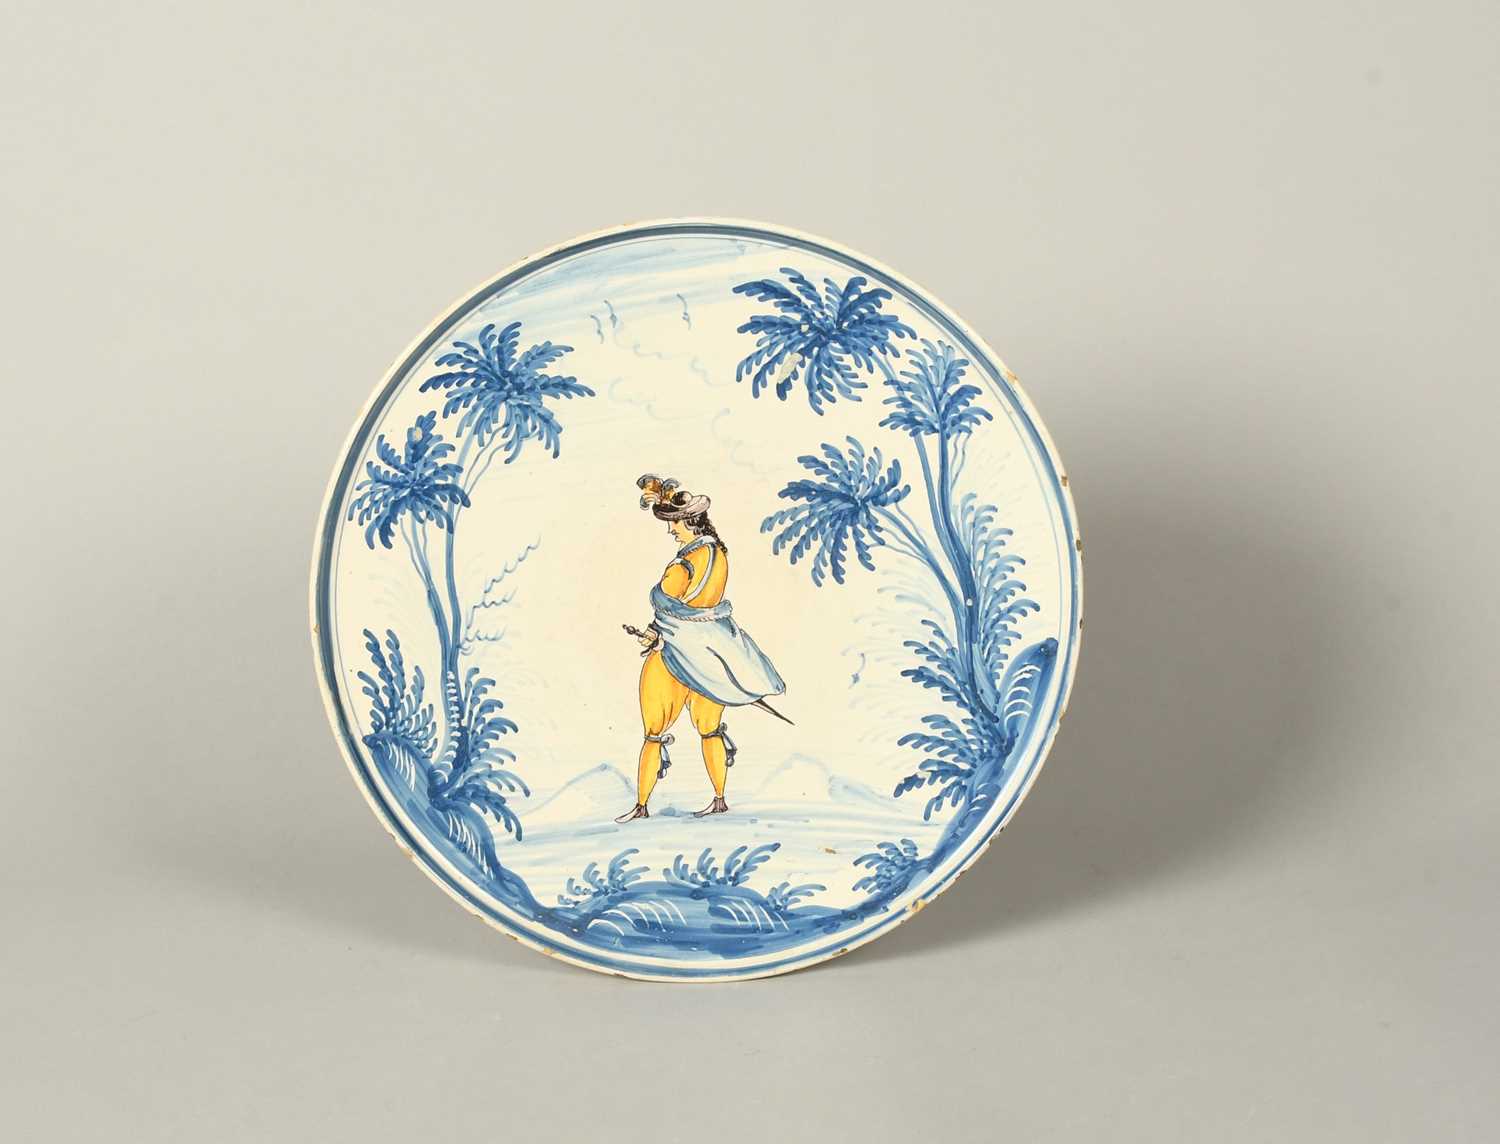 A large Italian maiolica tazza, 2nd half 18th century, the circular form painted in blue, ochre